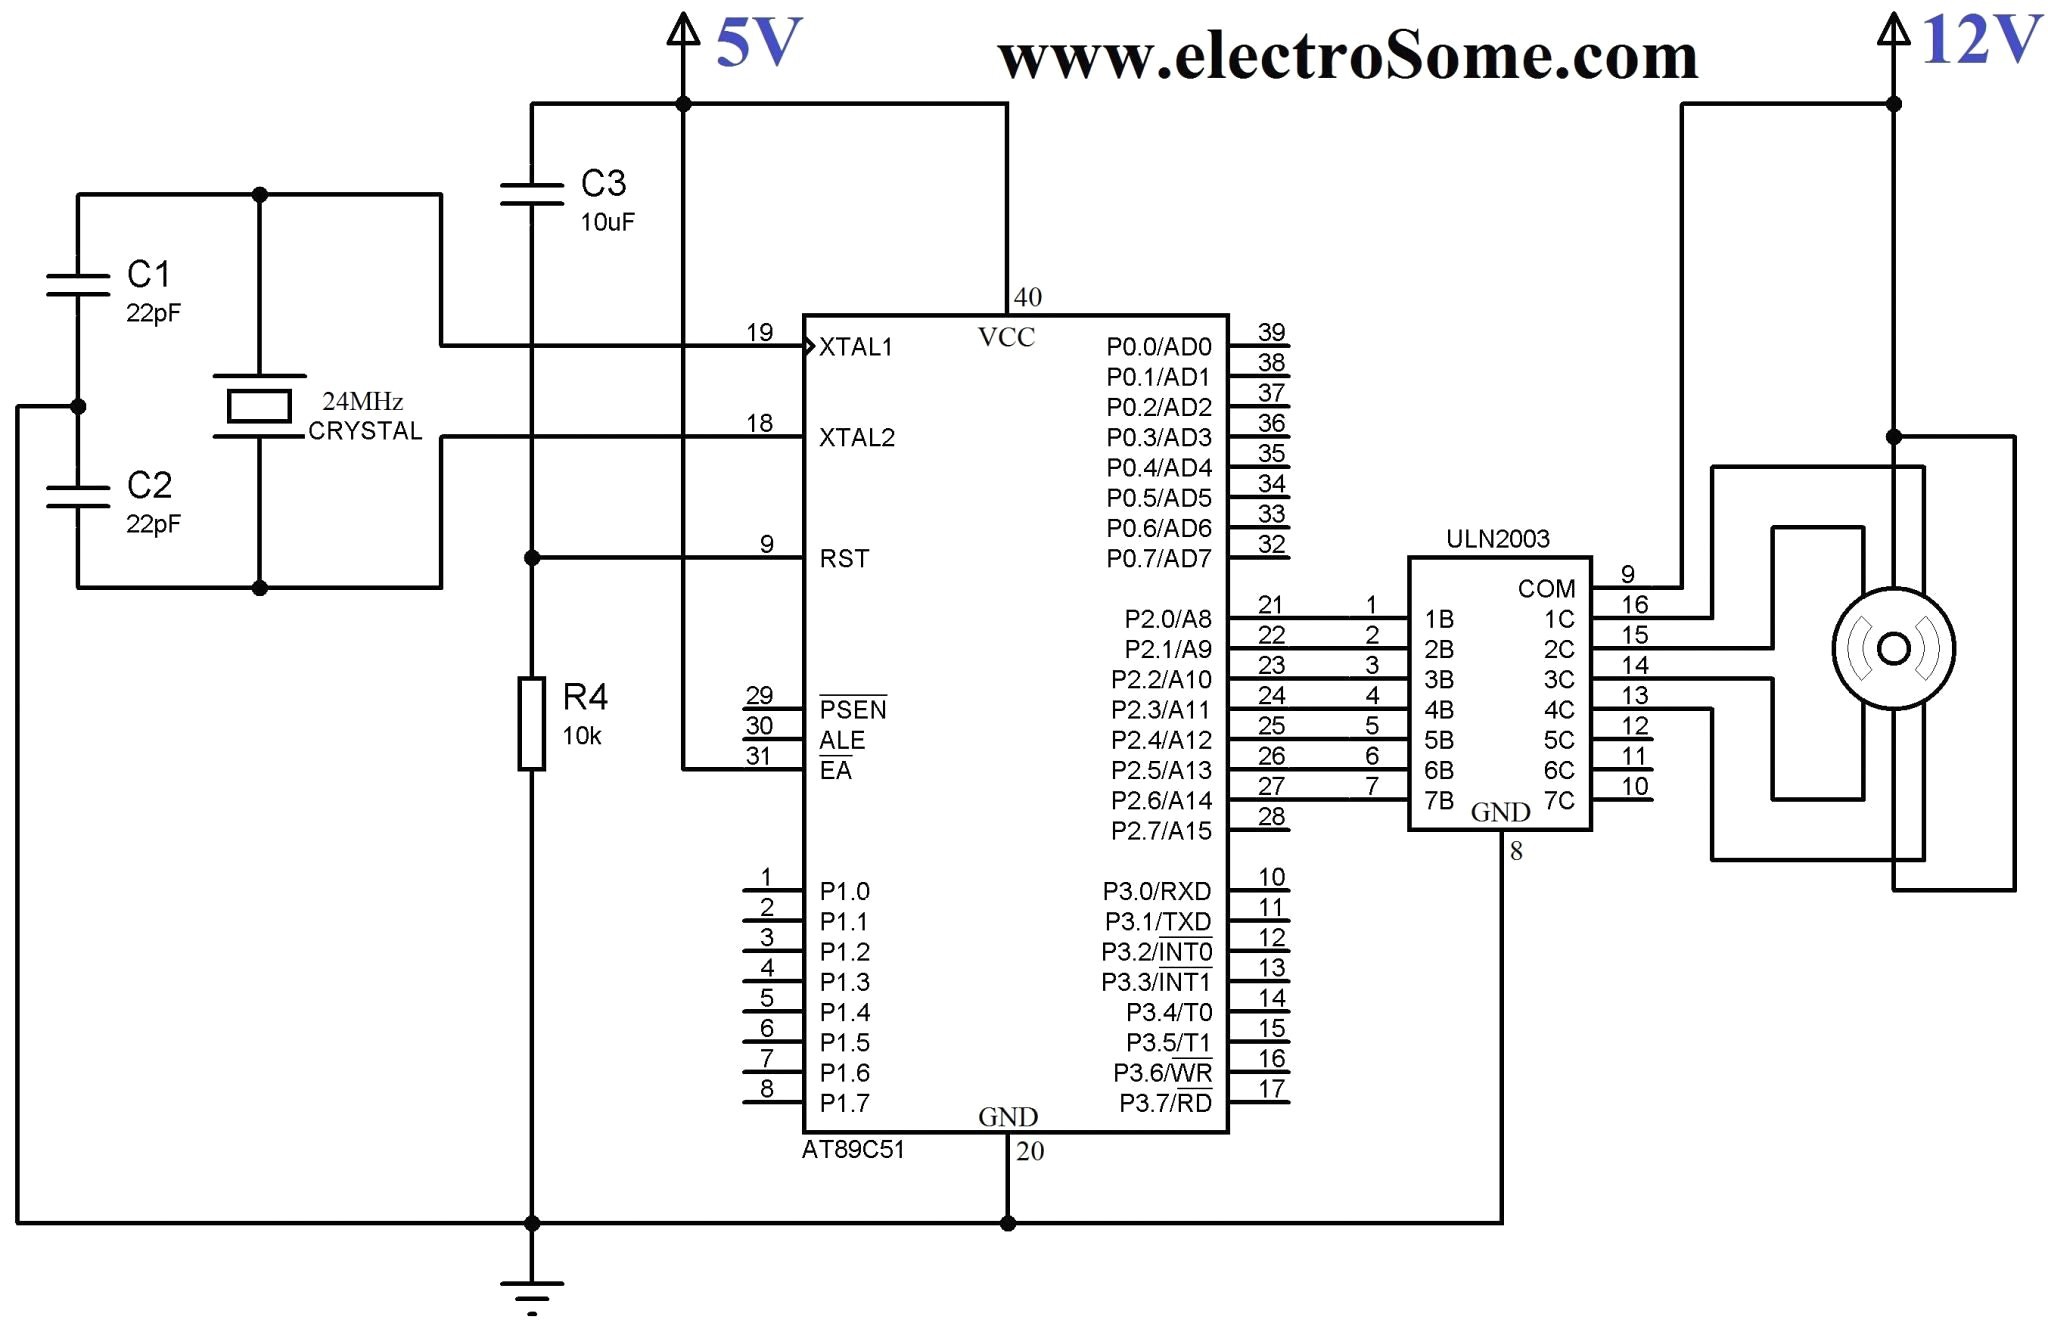 cell Wiring Diagram New Lighting Contactor With Cell And